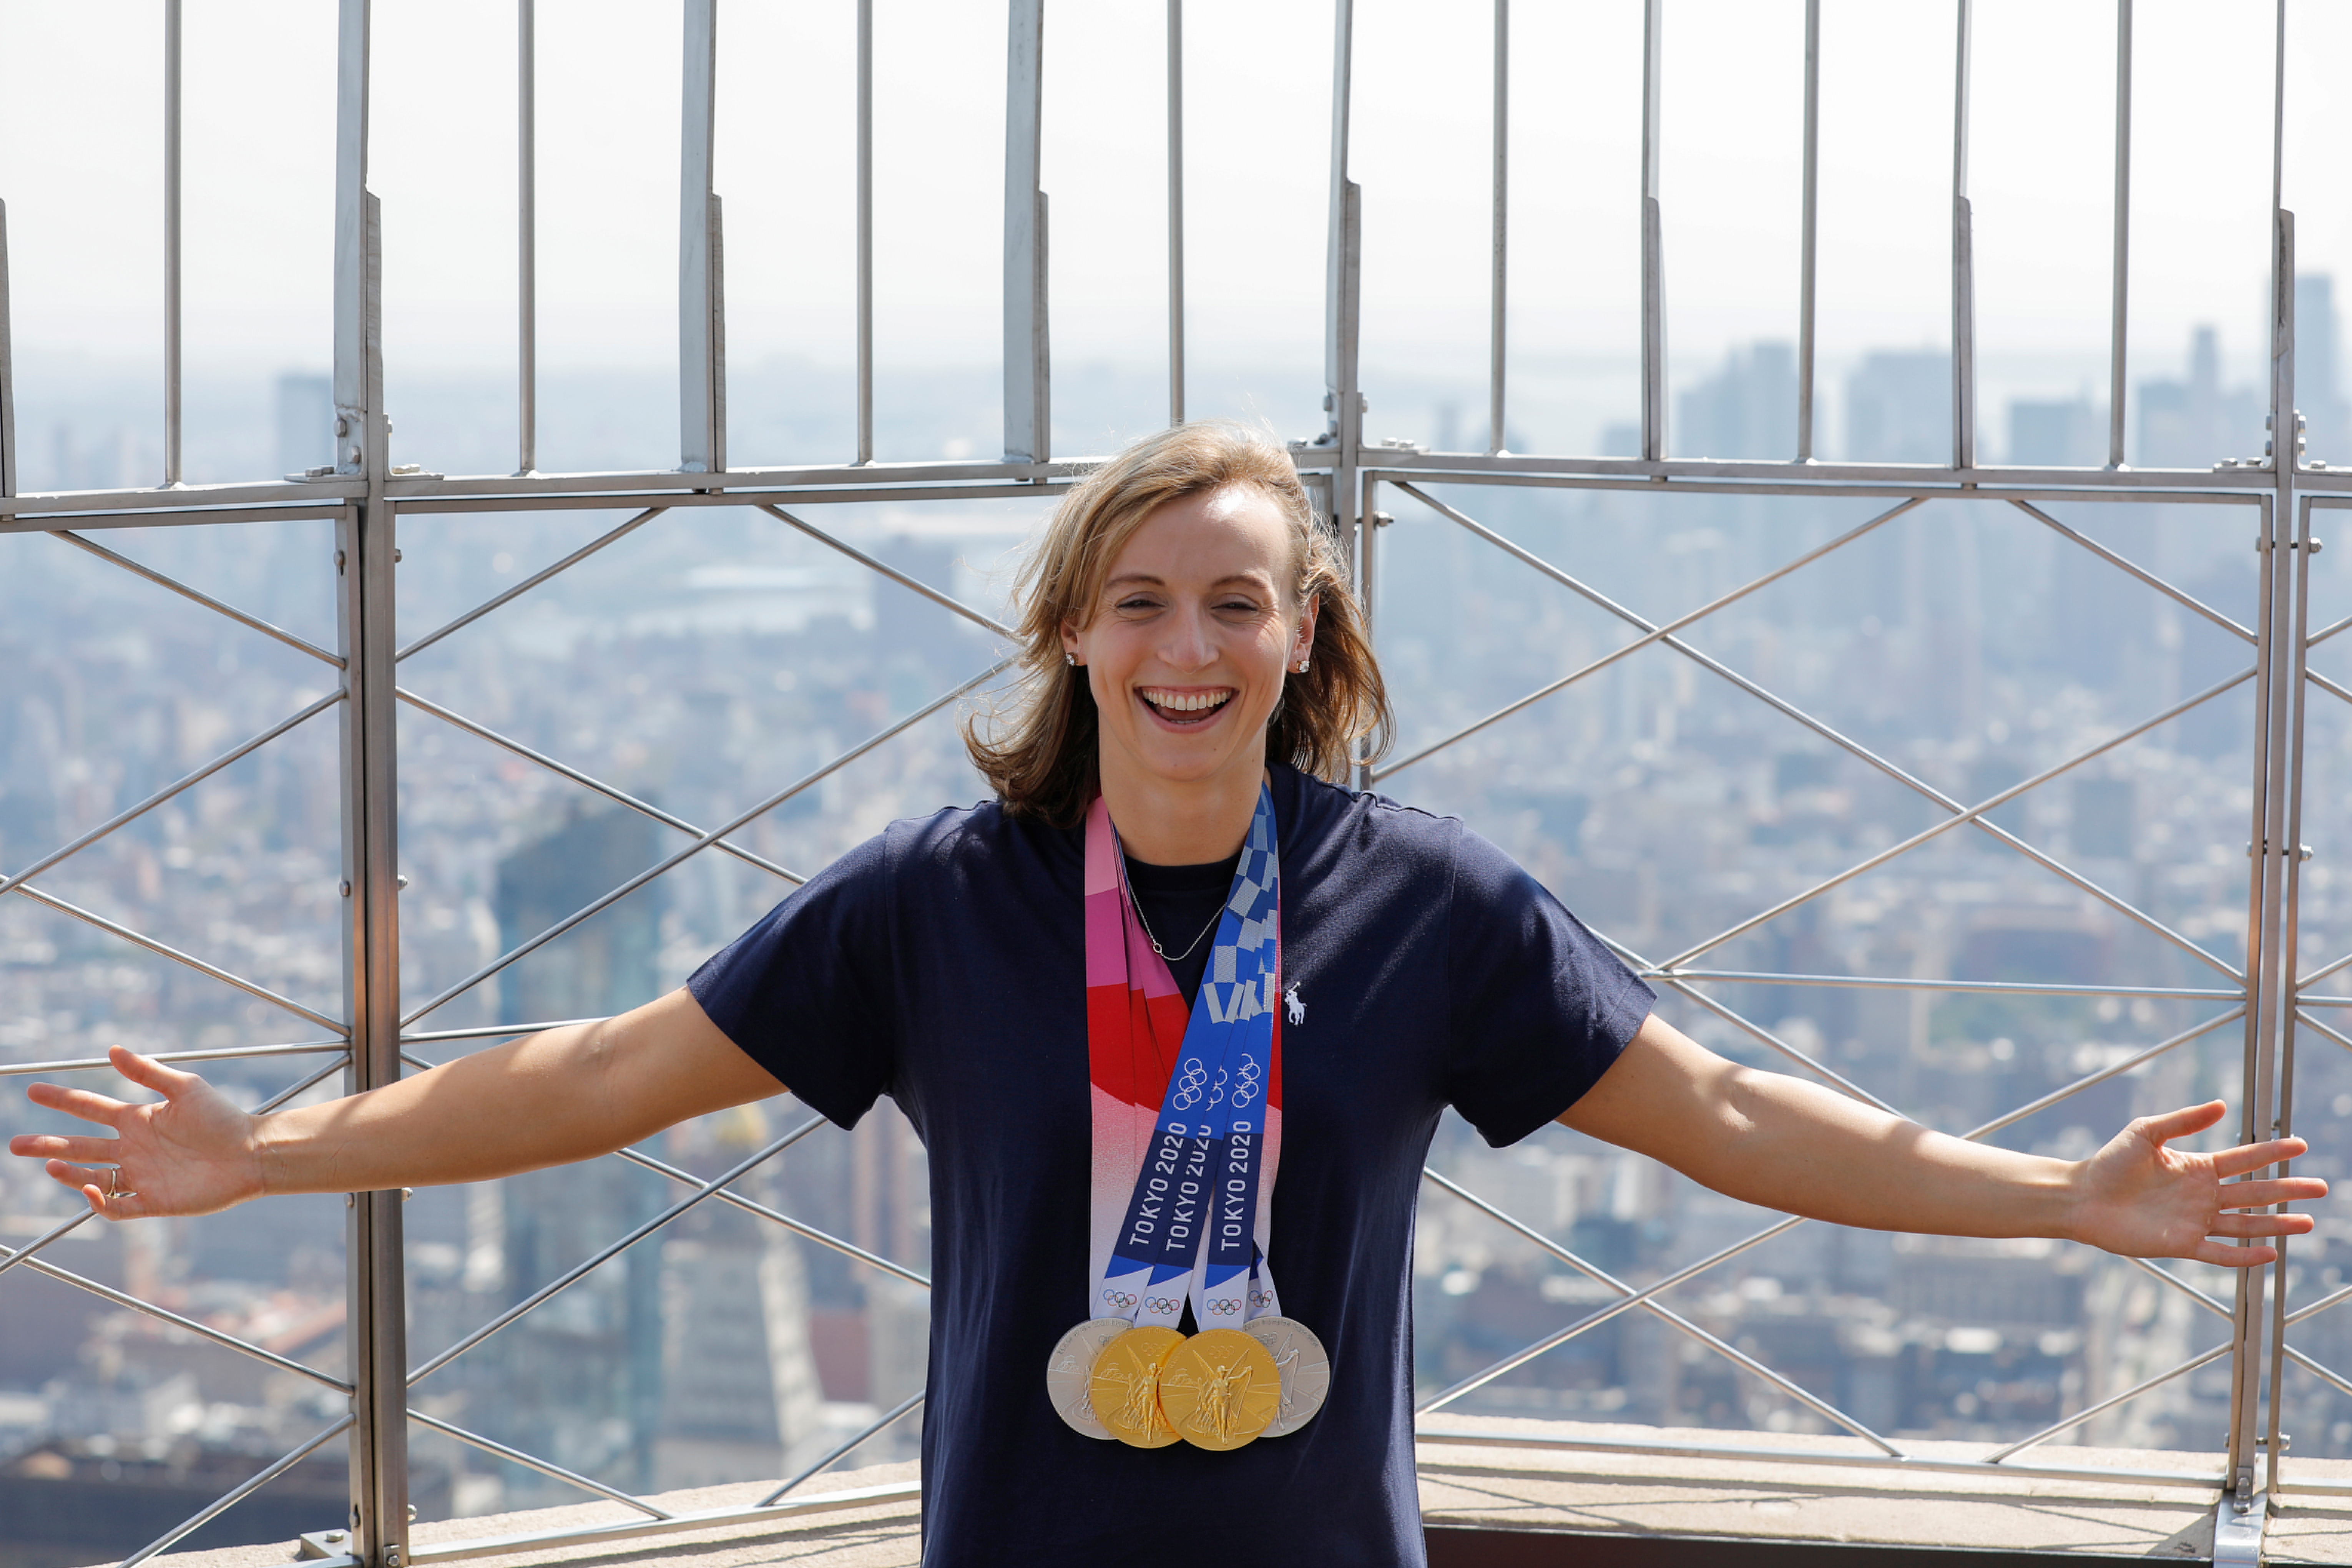 Tokyo 2020 Olympic Team USA swimming gold medalist Katie Ledecky poses as she stands on the observation deck of the Empire State Building in Manhattan, New York City, U.S., August 12, 2021. REUTERS/Andrew Kelly